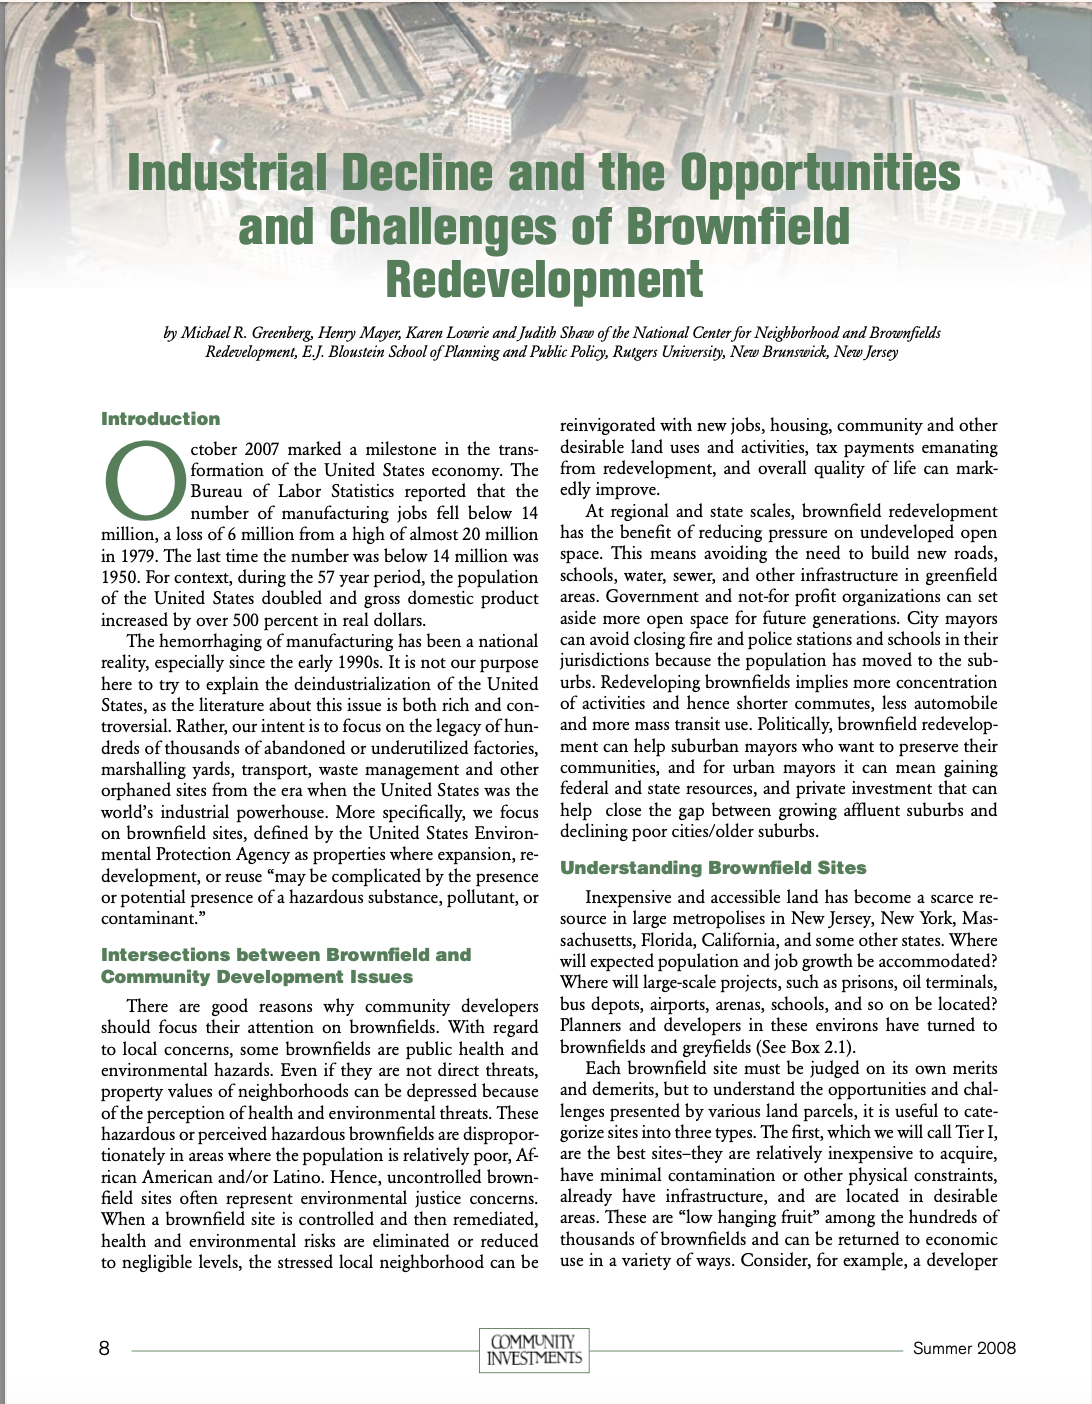 Industrial Decline and the Opportunities and Challenges of Brownfield Redevelopment